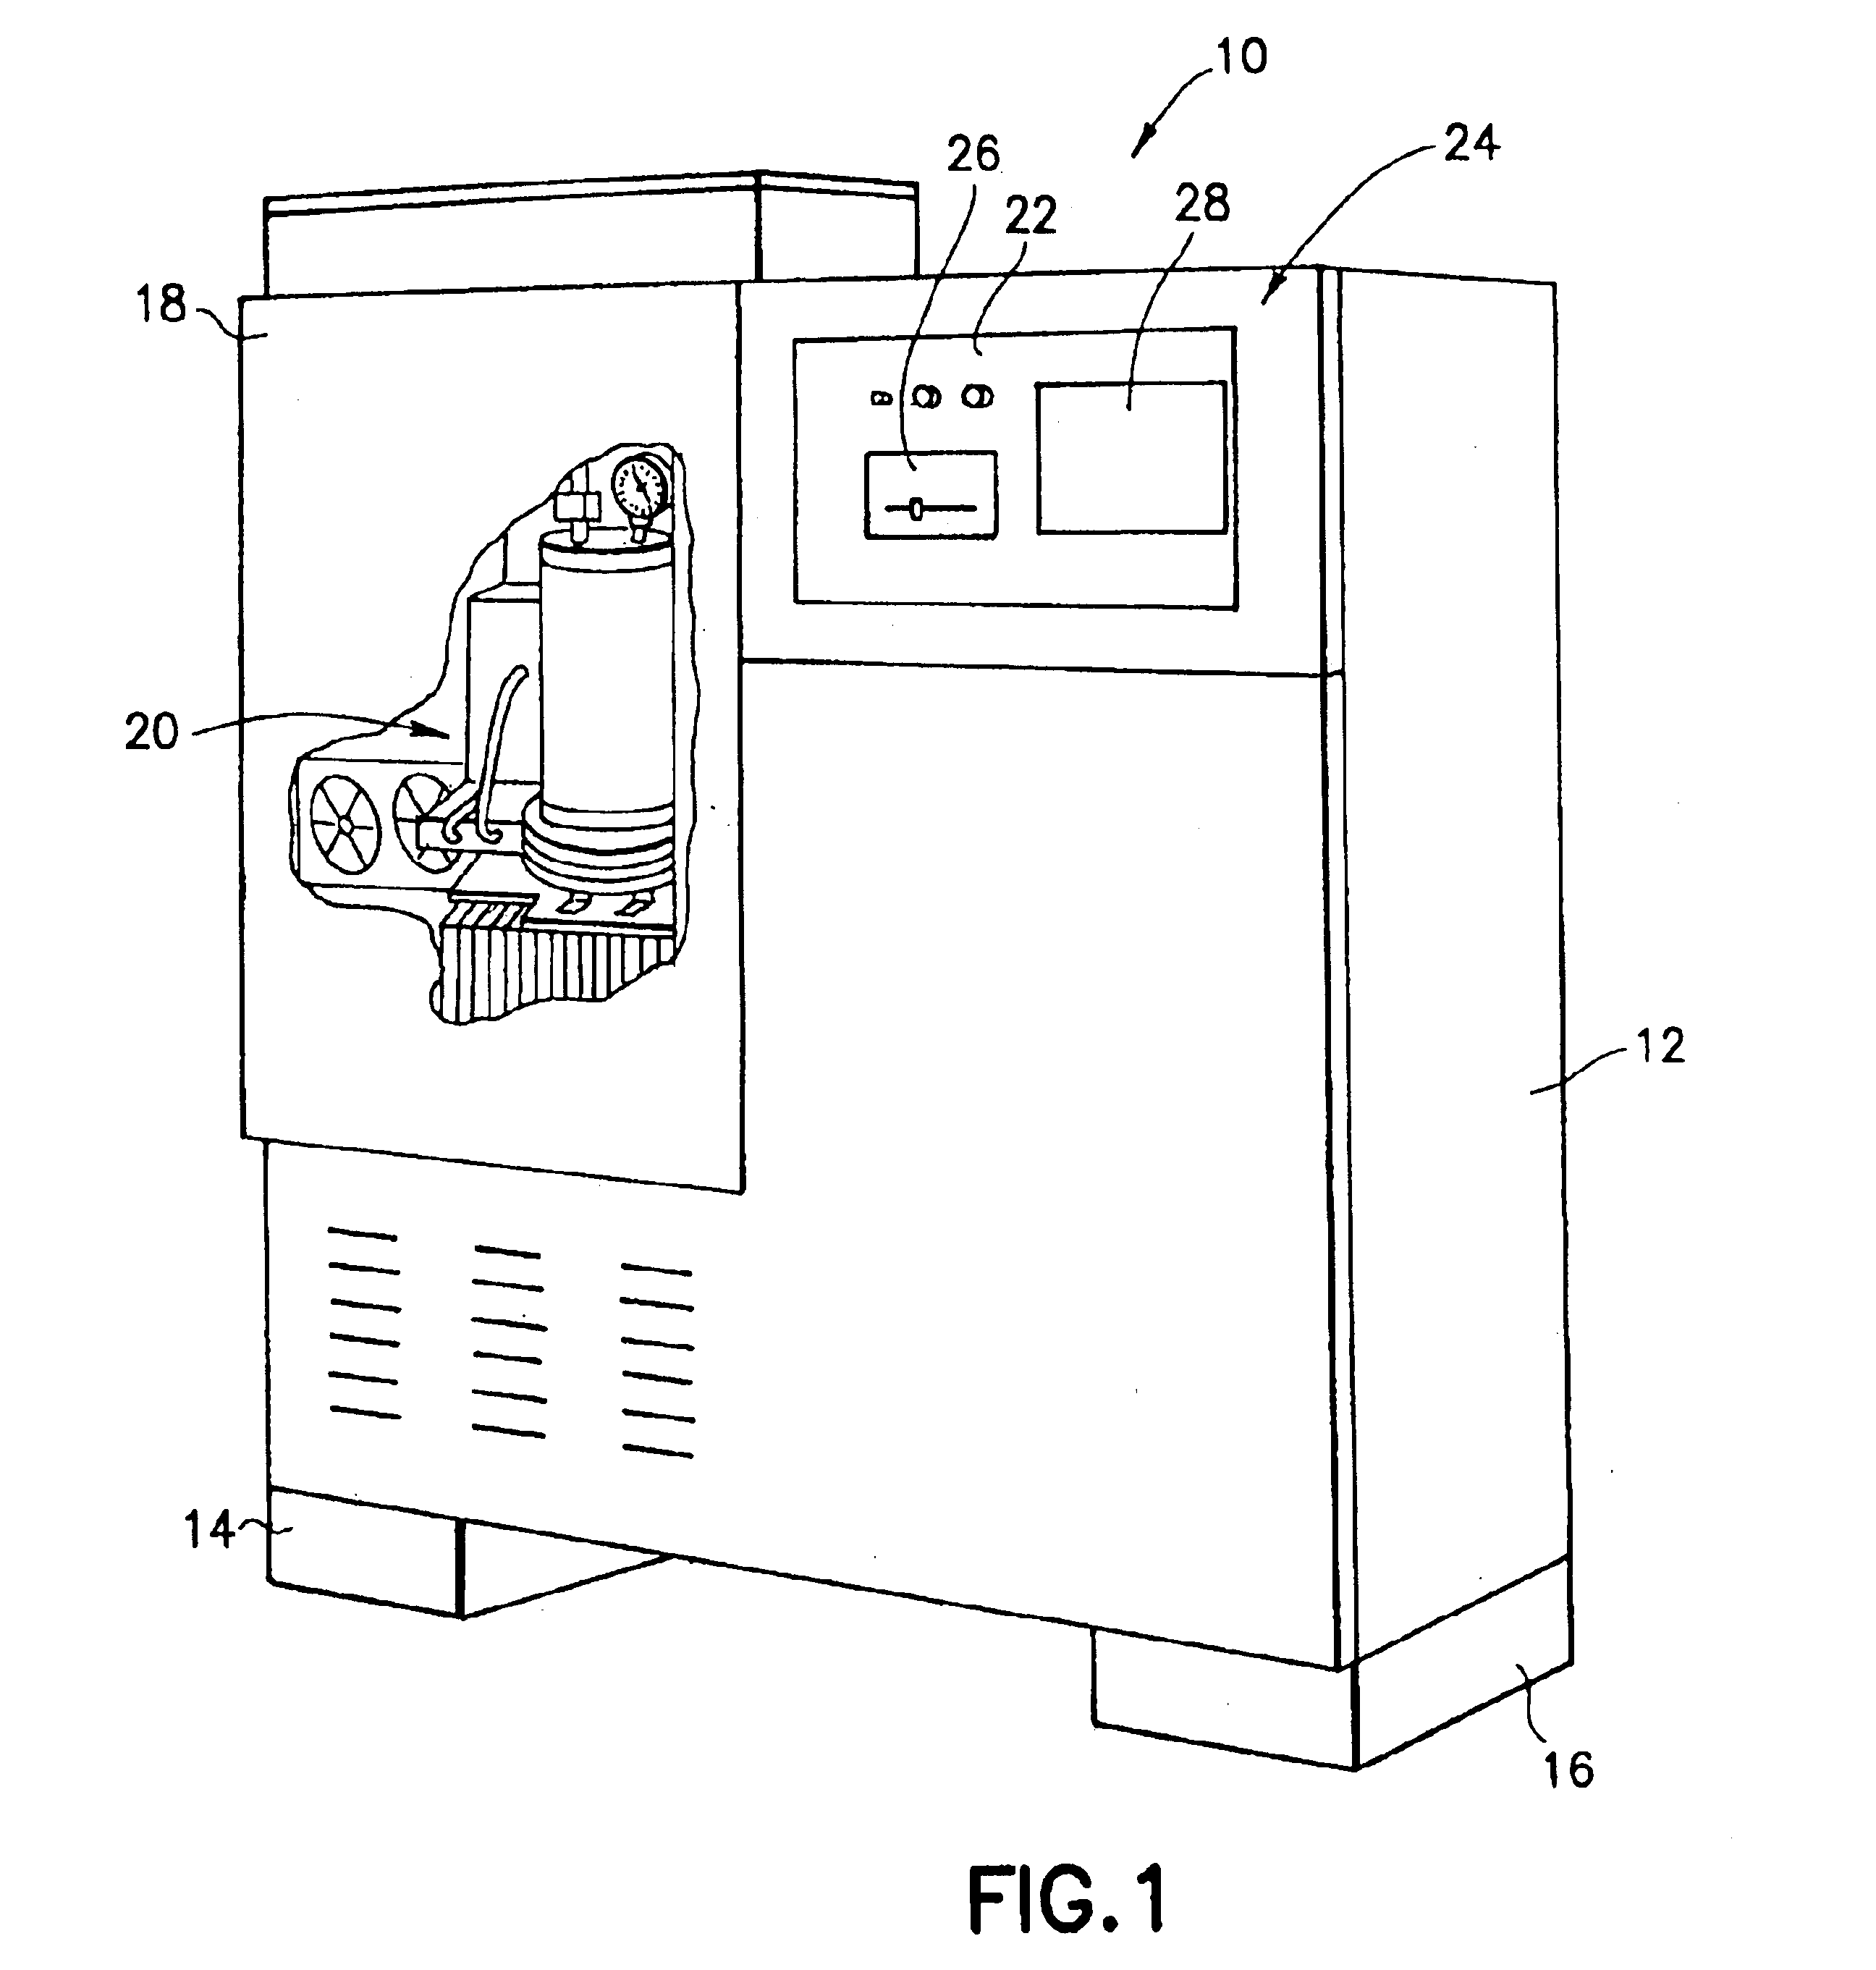 Fourier transform infrared (FTIR) spectrometric toxic gas monitoring system, and method of detecting toxic gas species in a fluid environment containing or susceptible to the presence of such toxic gas species